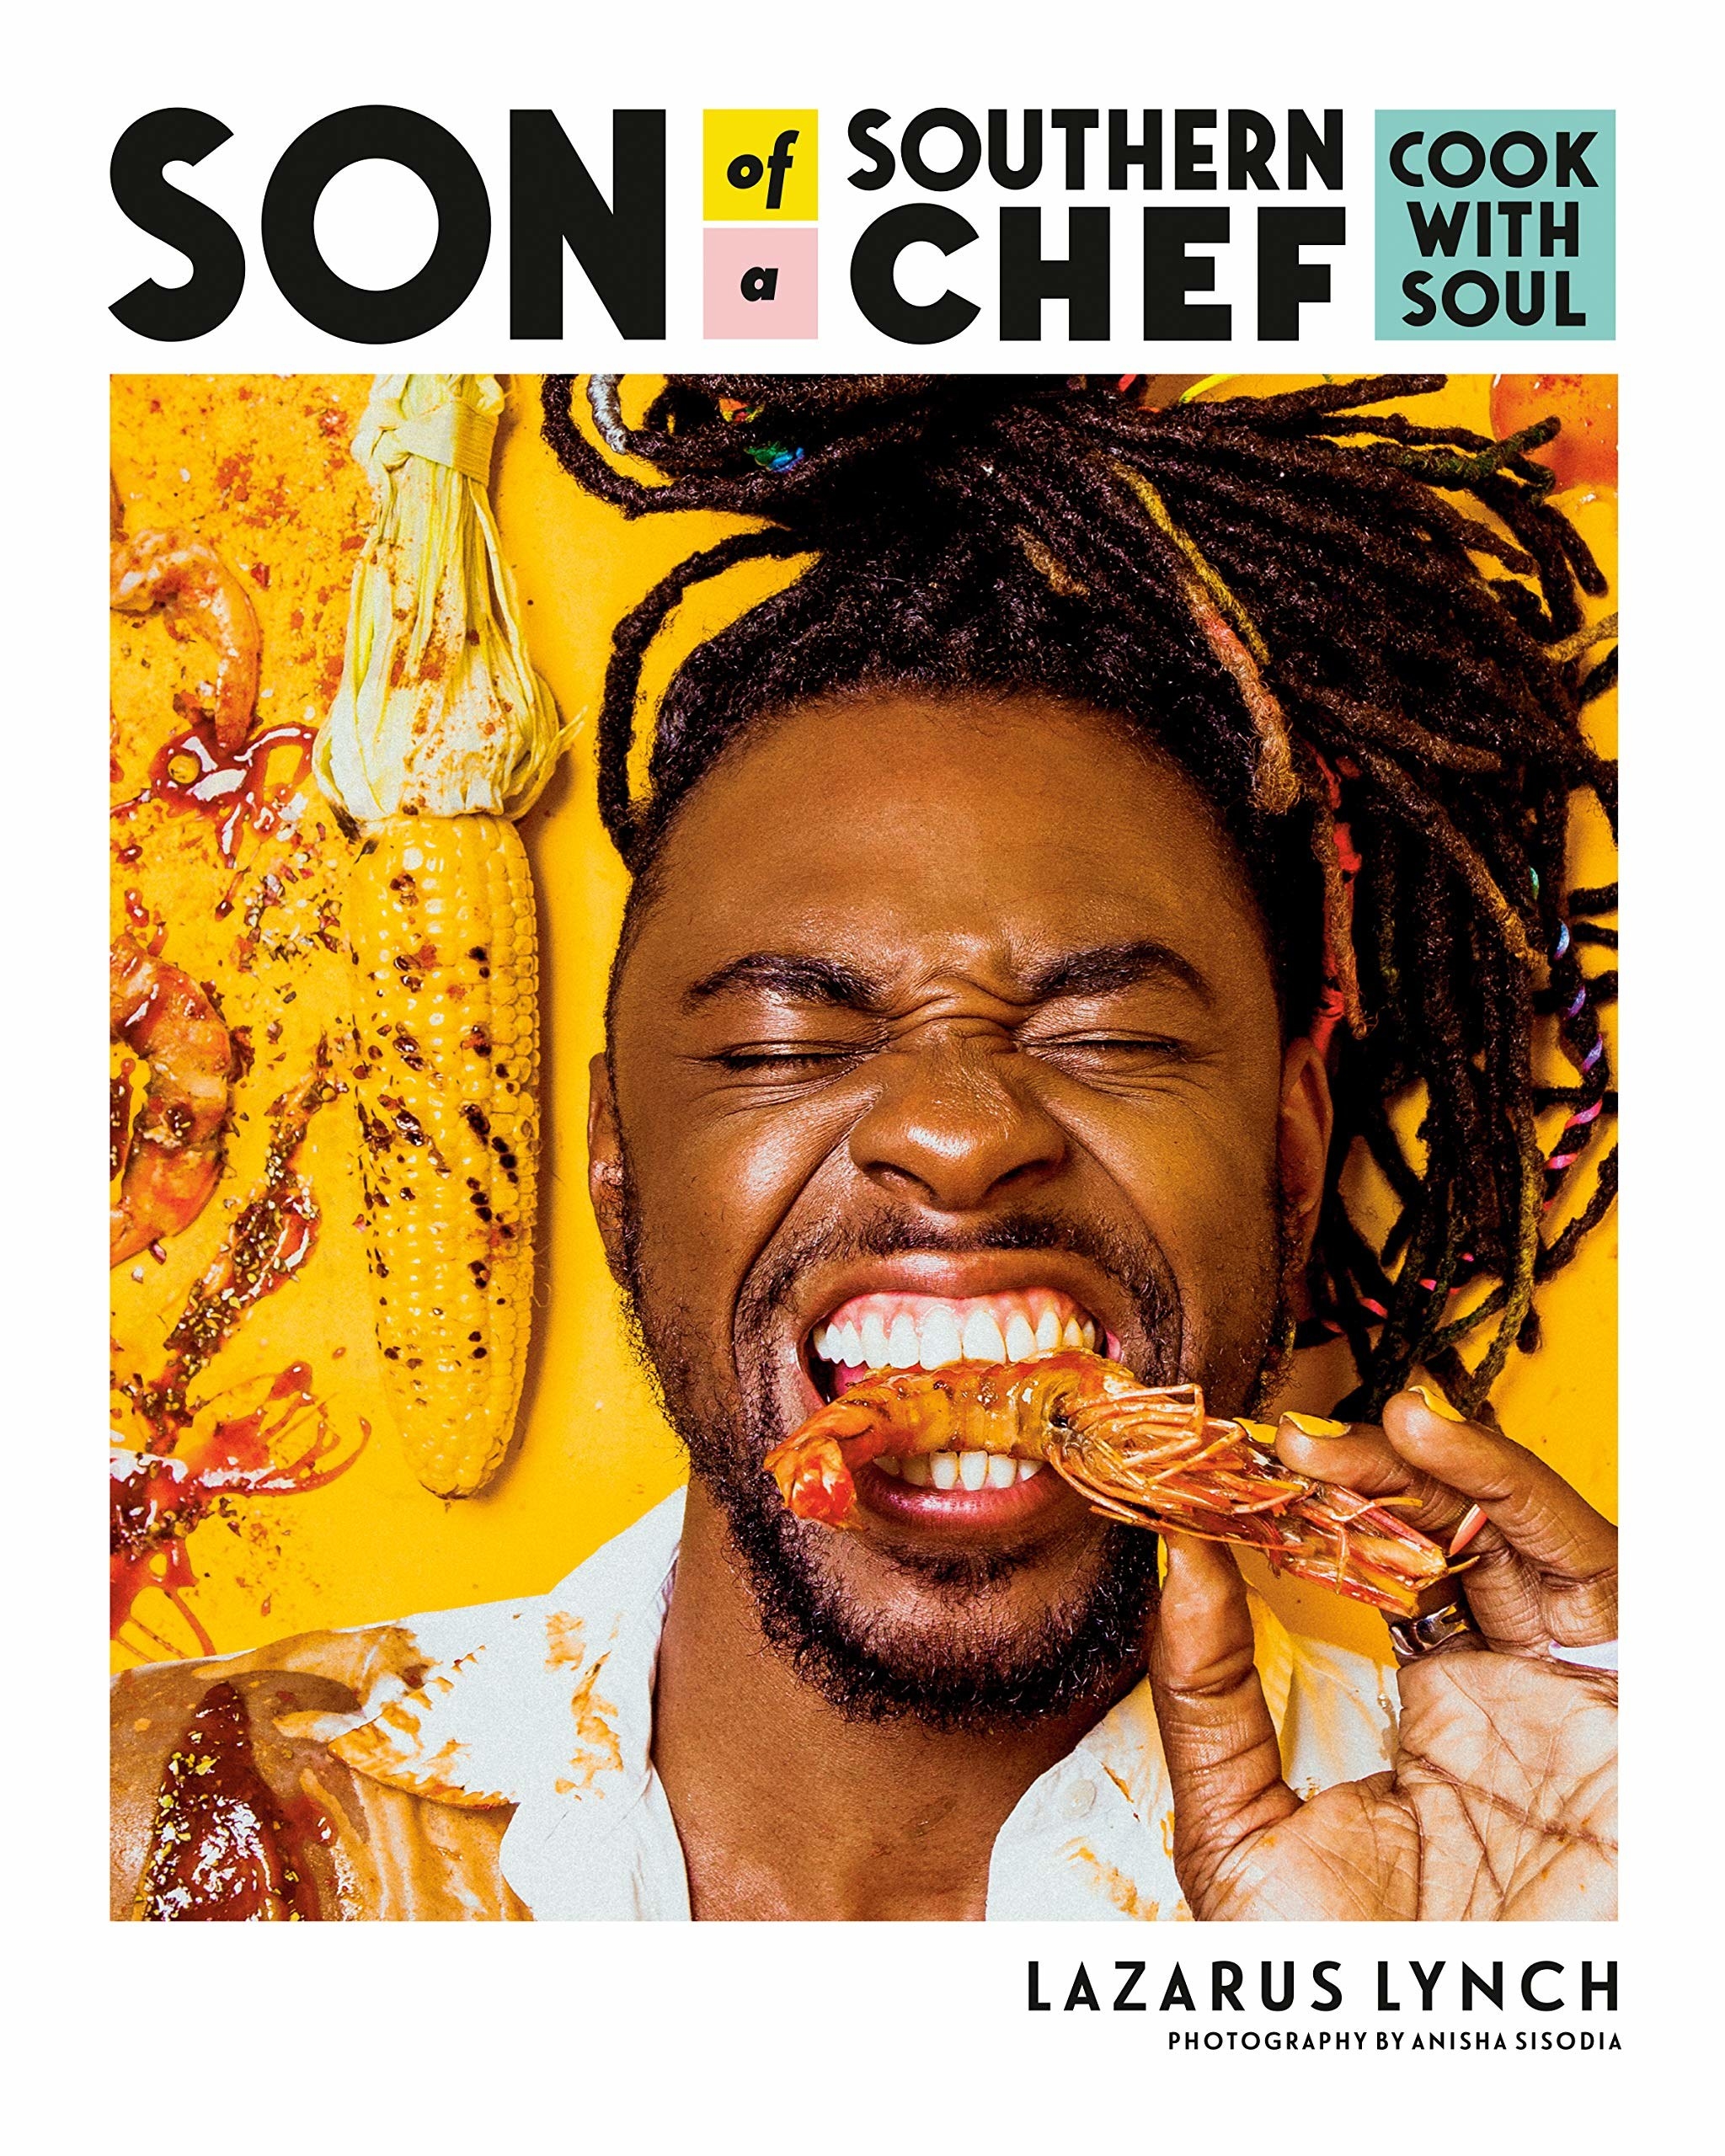 The cover of the book which features author and chef Lazarus Lynch